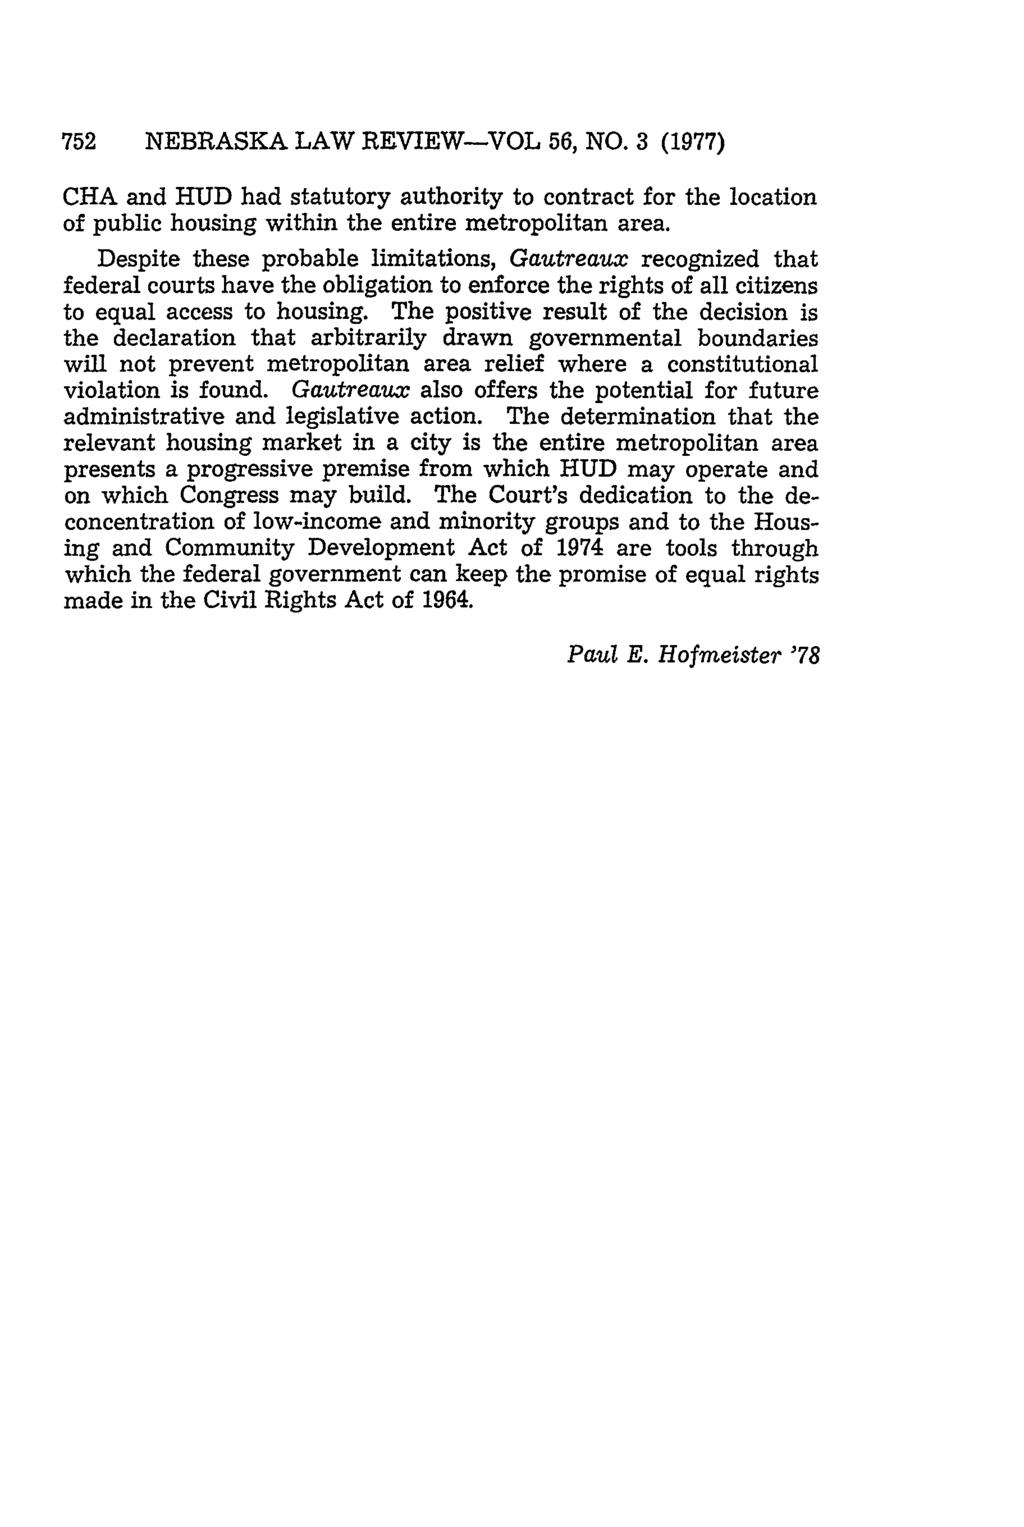 752 NEBRASKA LAW REVIEW-VOL 56, NO. 3 (1977) CHA and HUD had statutory authority to contract for the location of public housing within the entire metropolitan area.